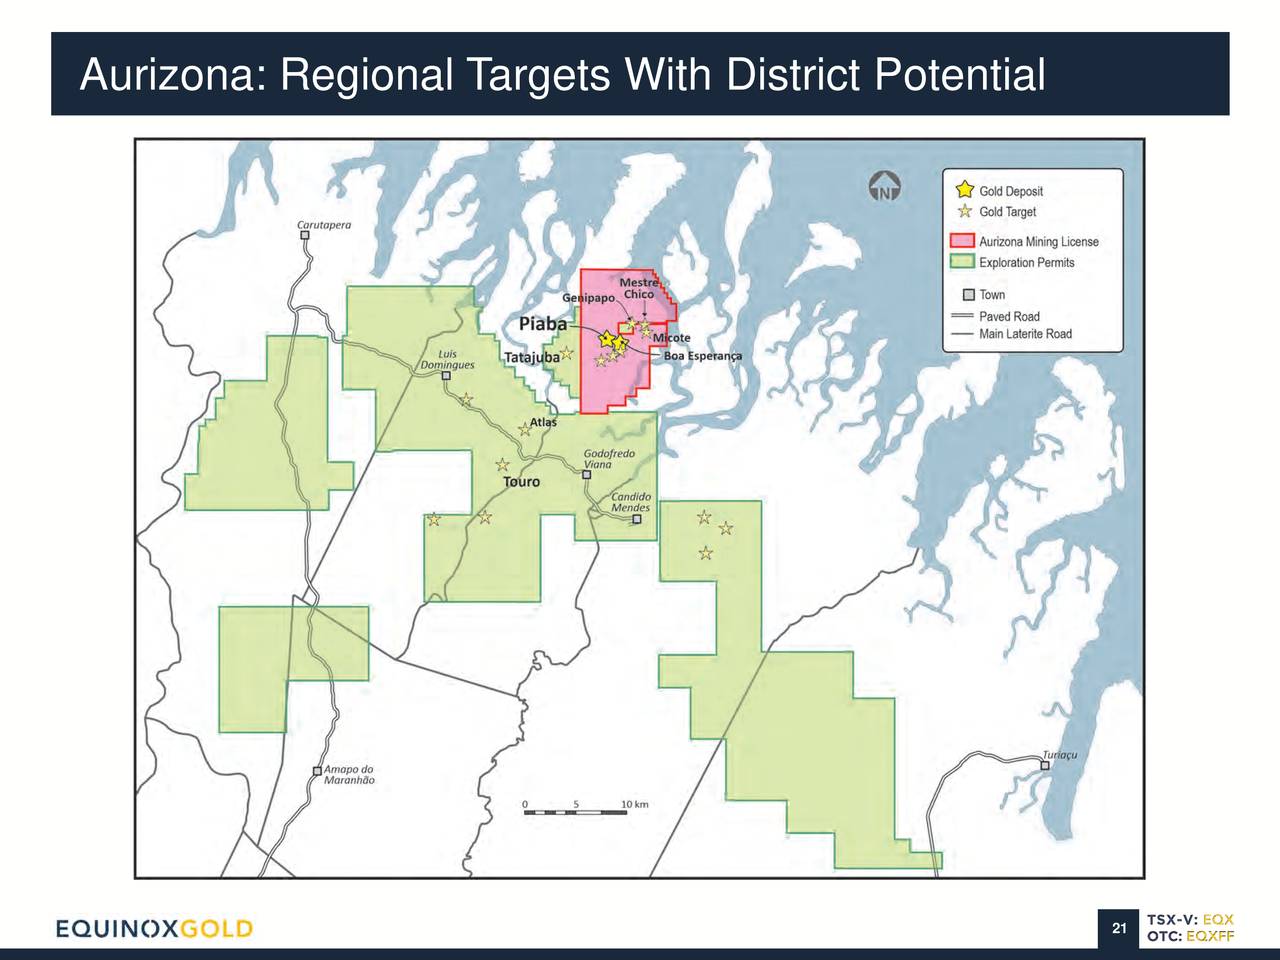 Aurizona: Regional Targets With District Potential